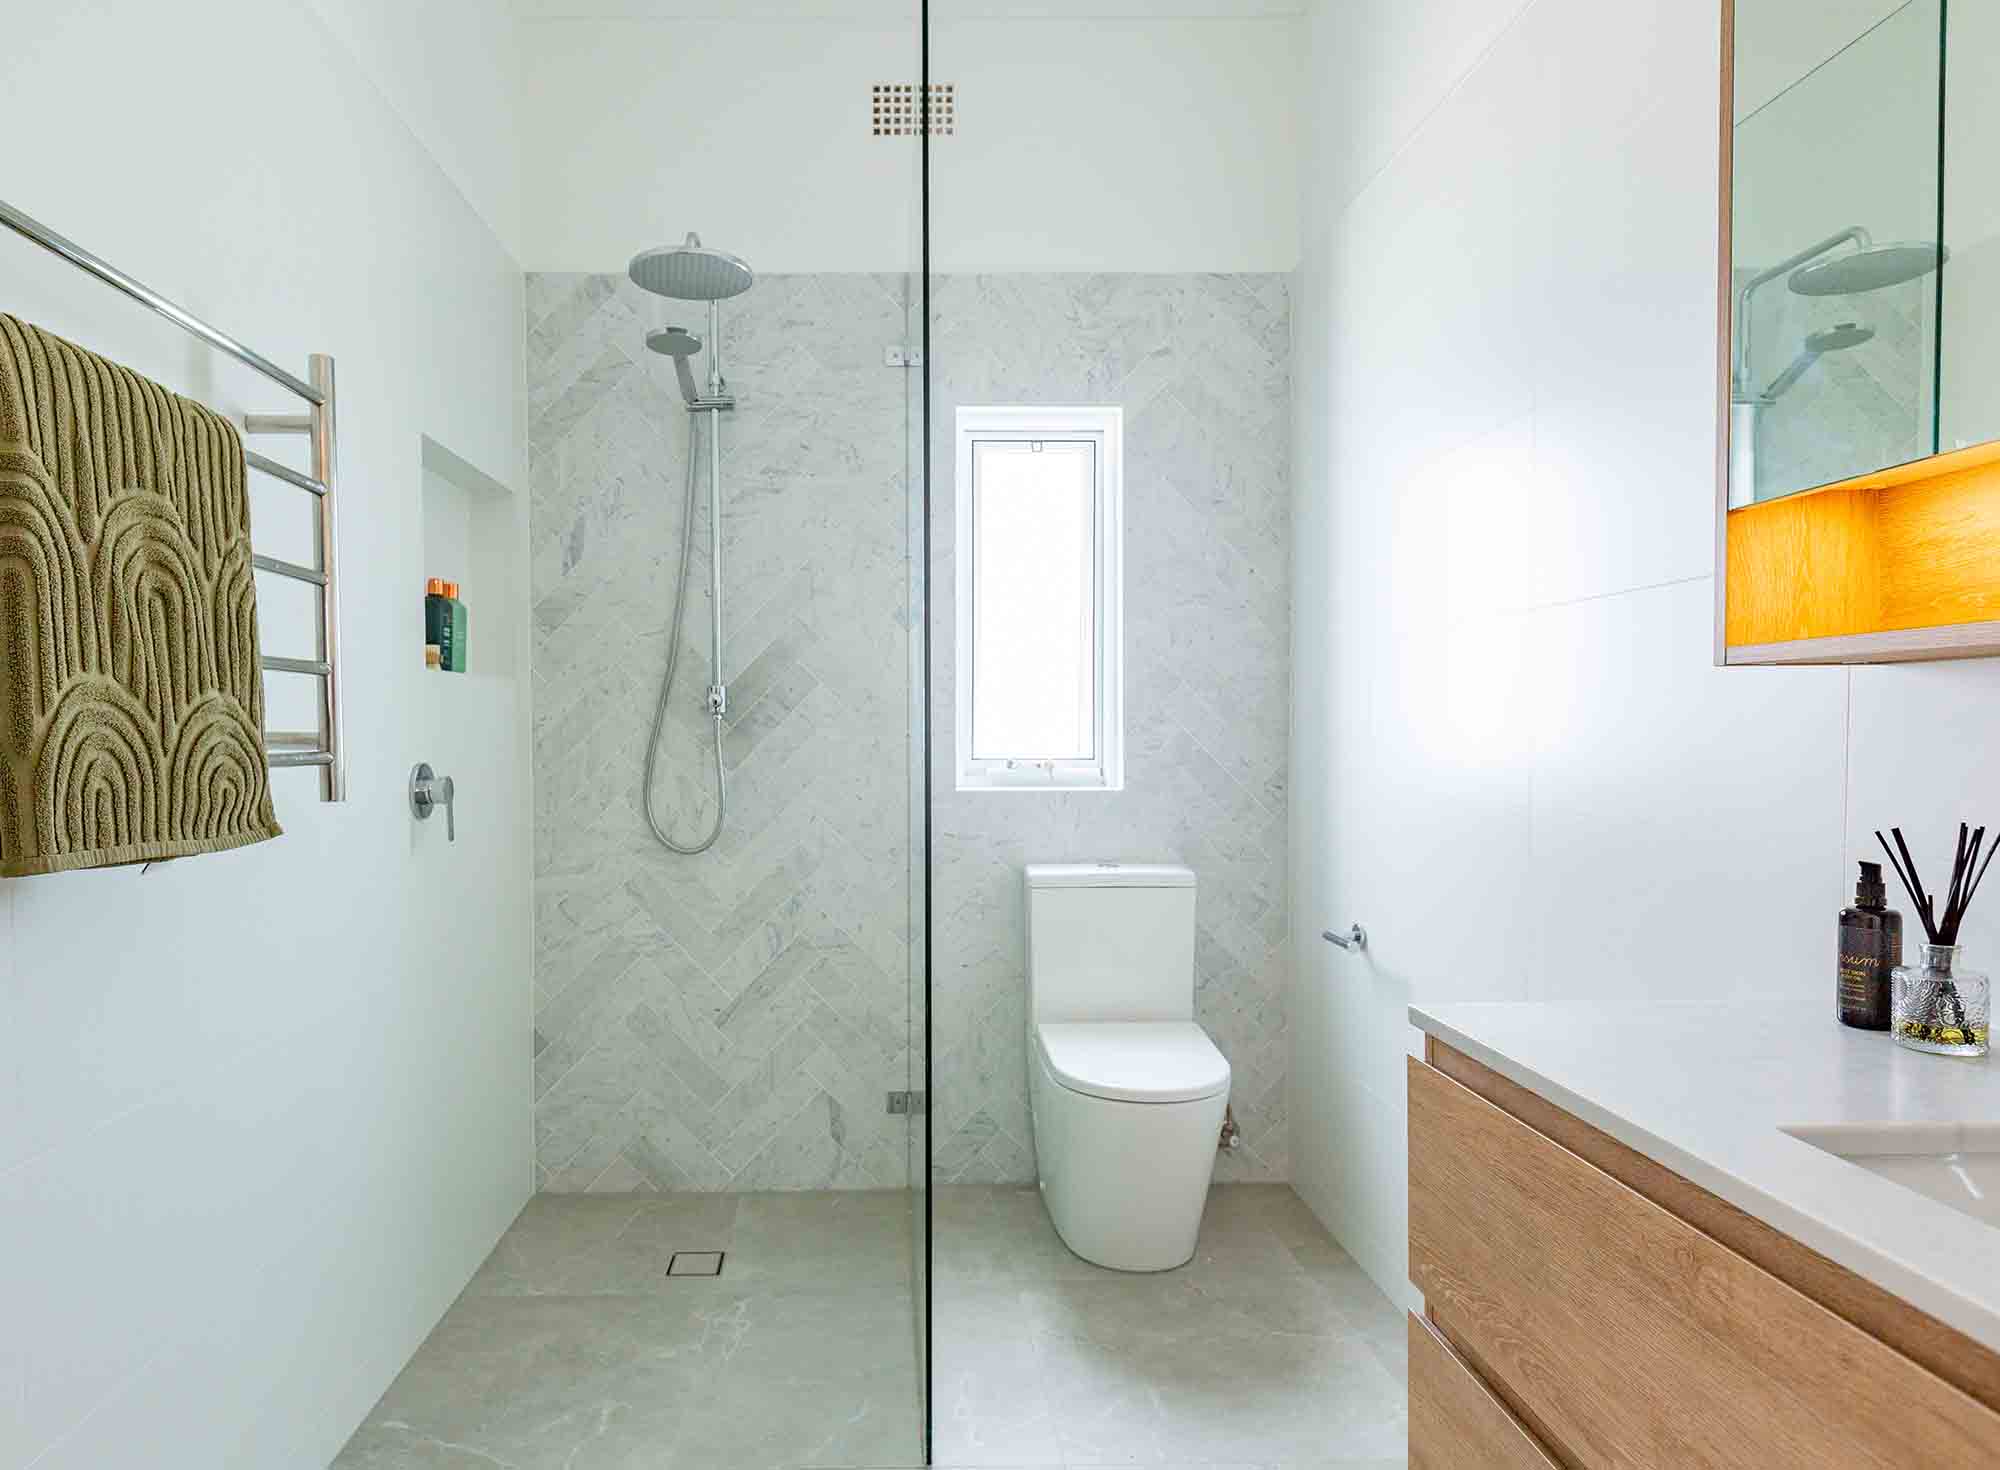 Cost Breakdown: Understanding the Expenses Involved in a Bathroom Renovation